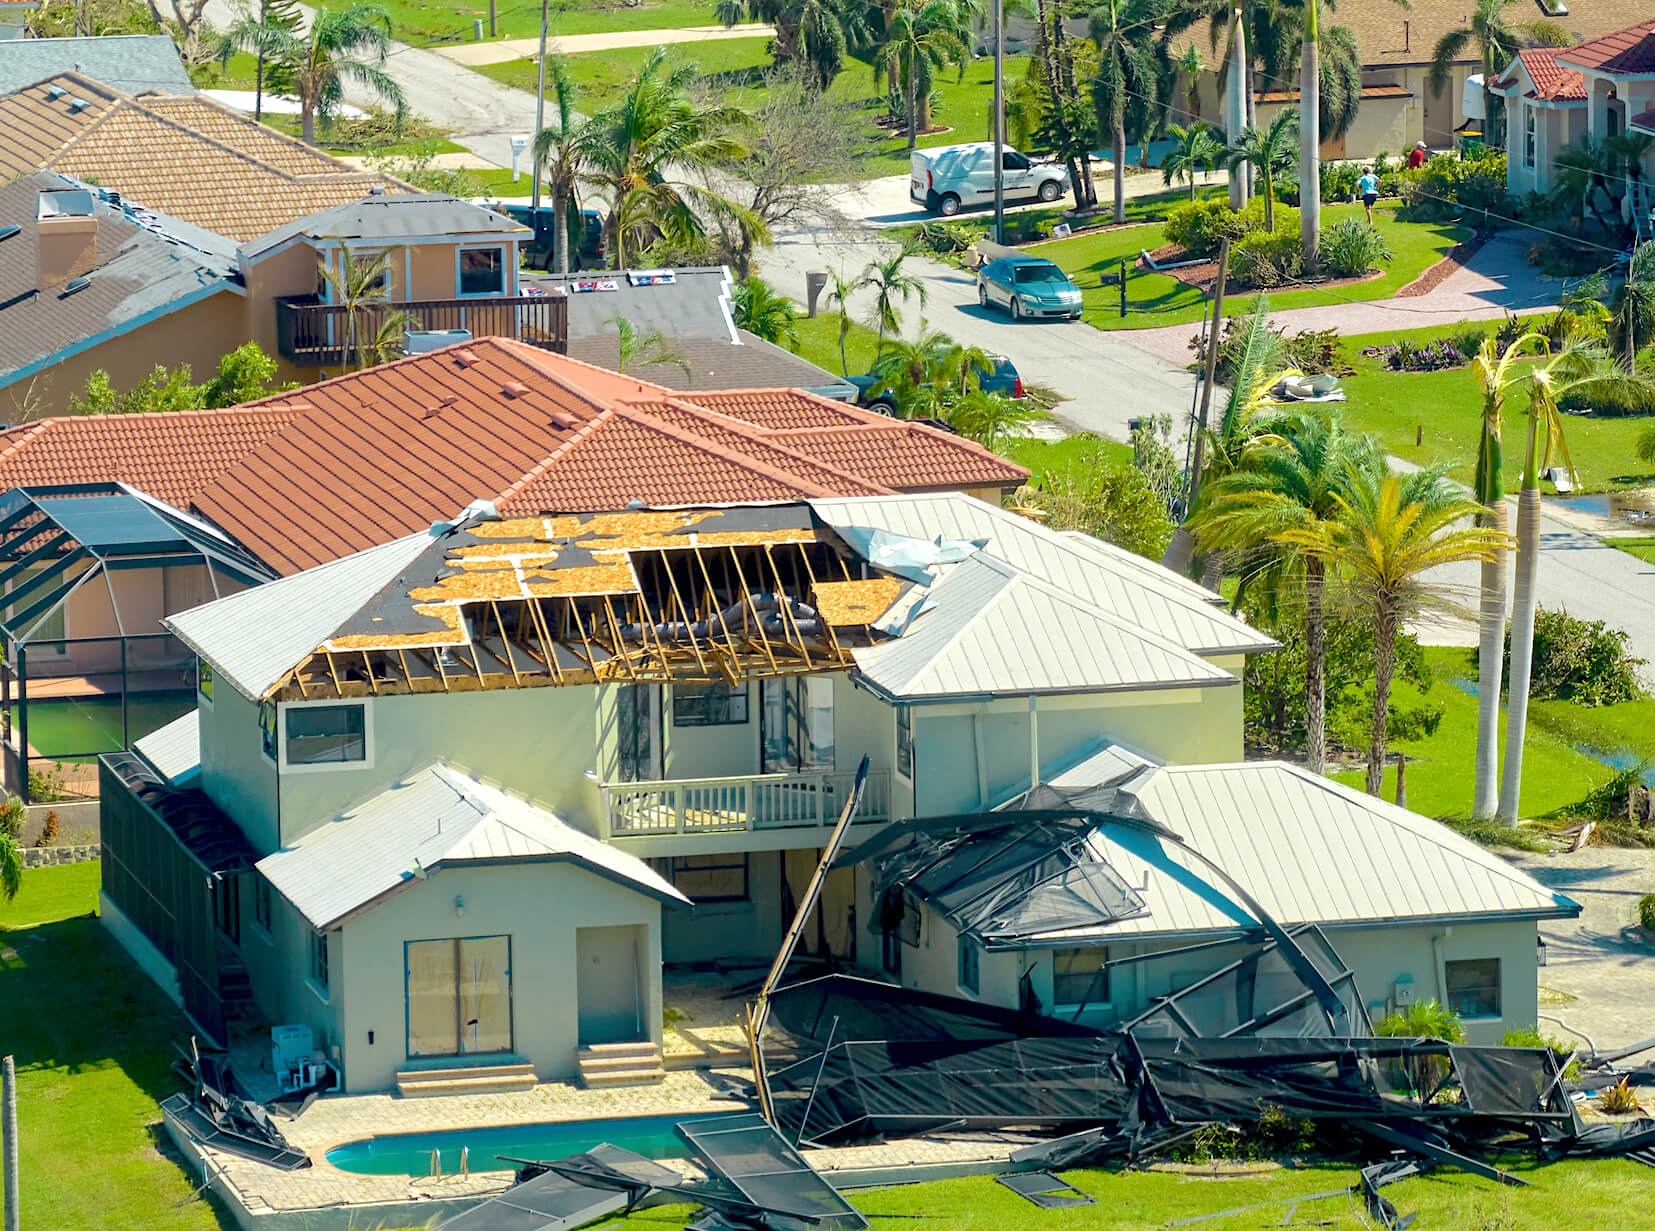 House Damage From Hurricane